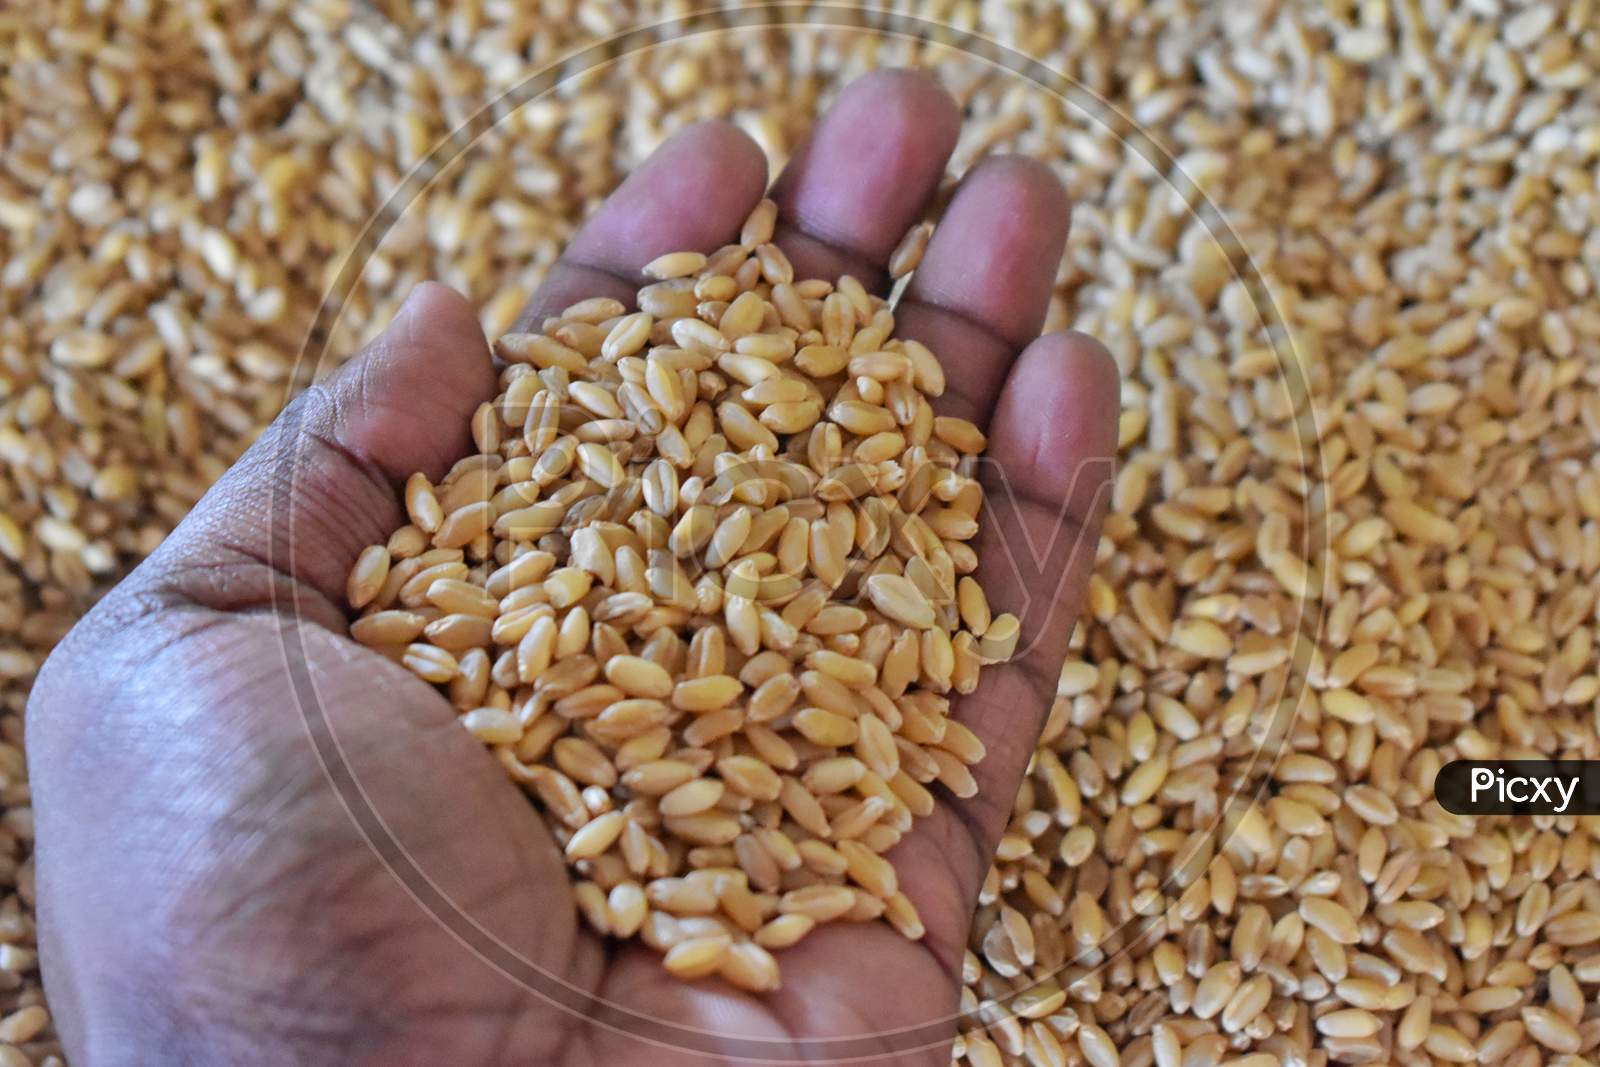 The Hands Of A Farmer Close-Up Holding A Handful Of Wheat Grains In A Wheat Field.